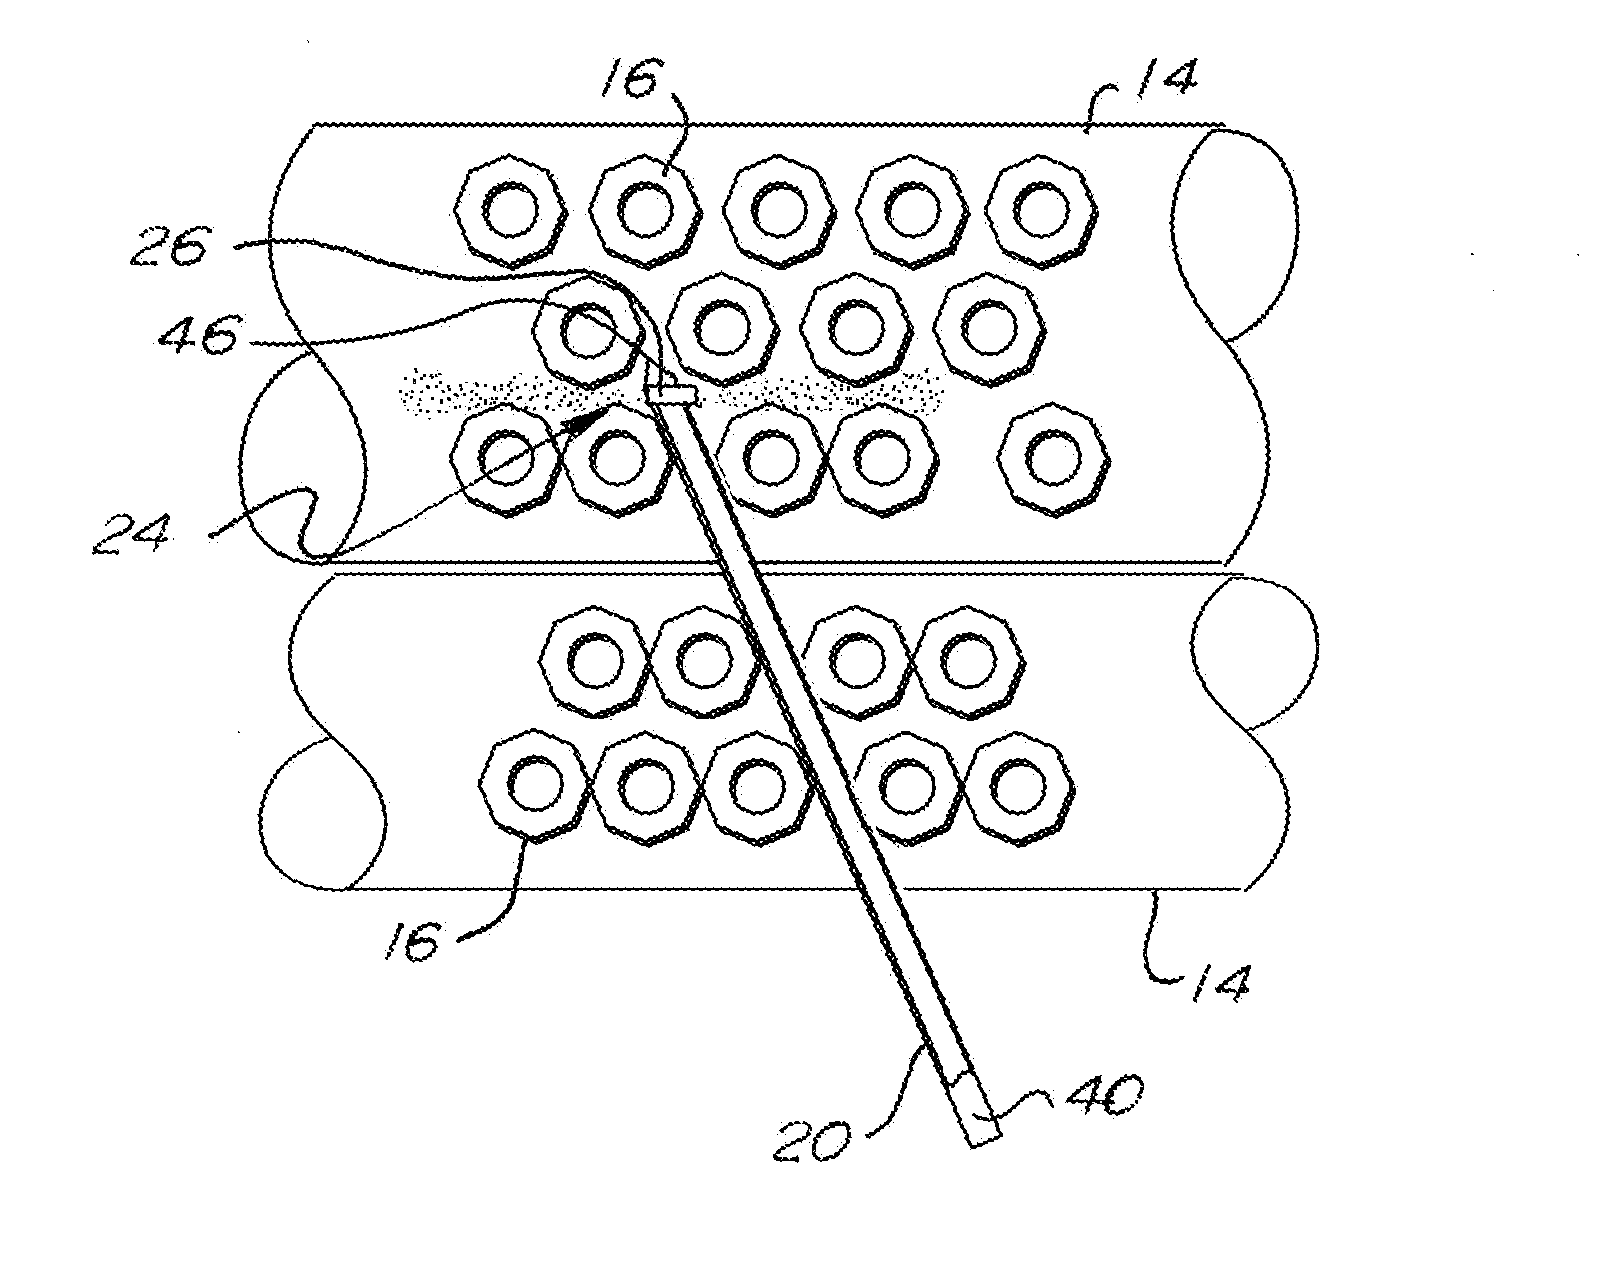 Tube spreading device and boiler cleaning system